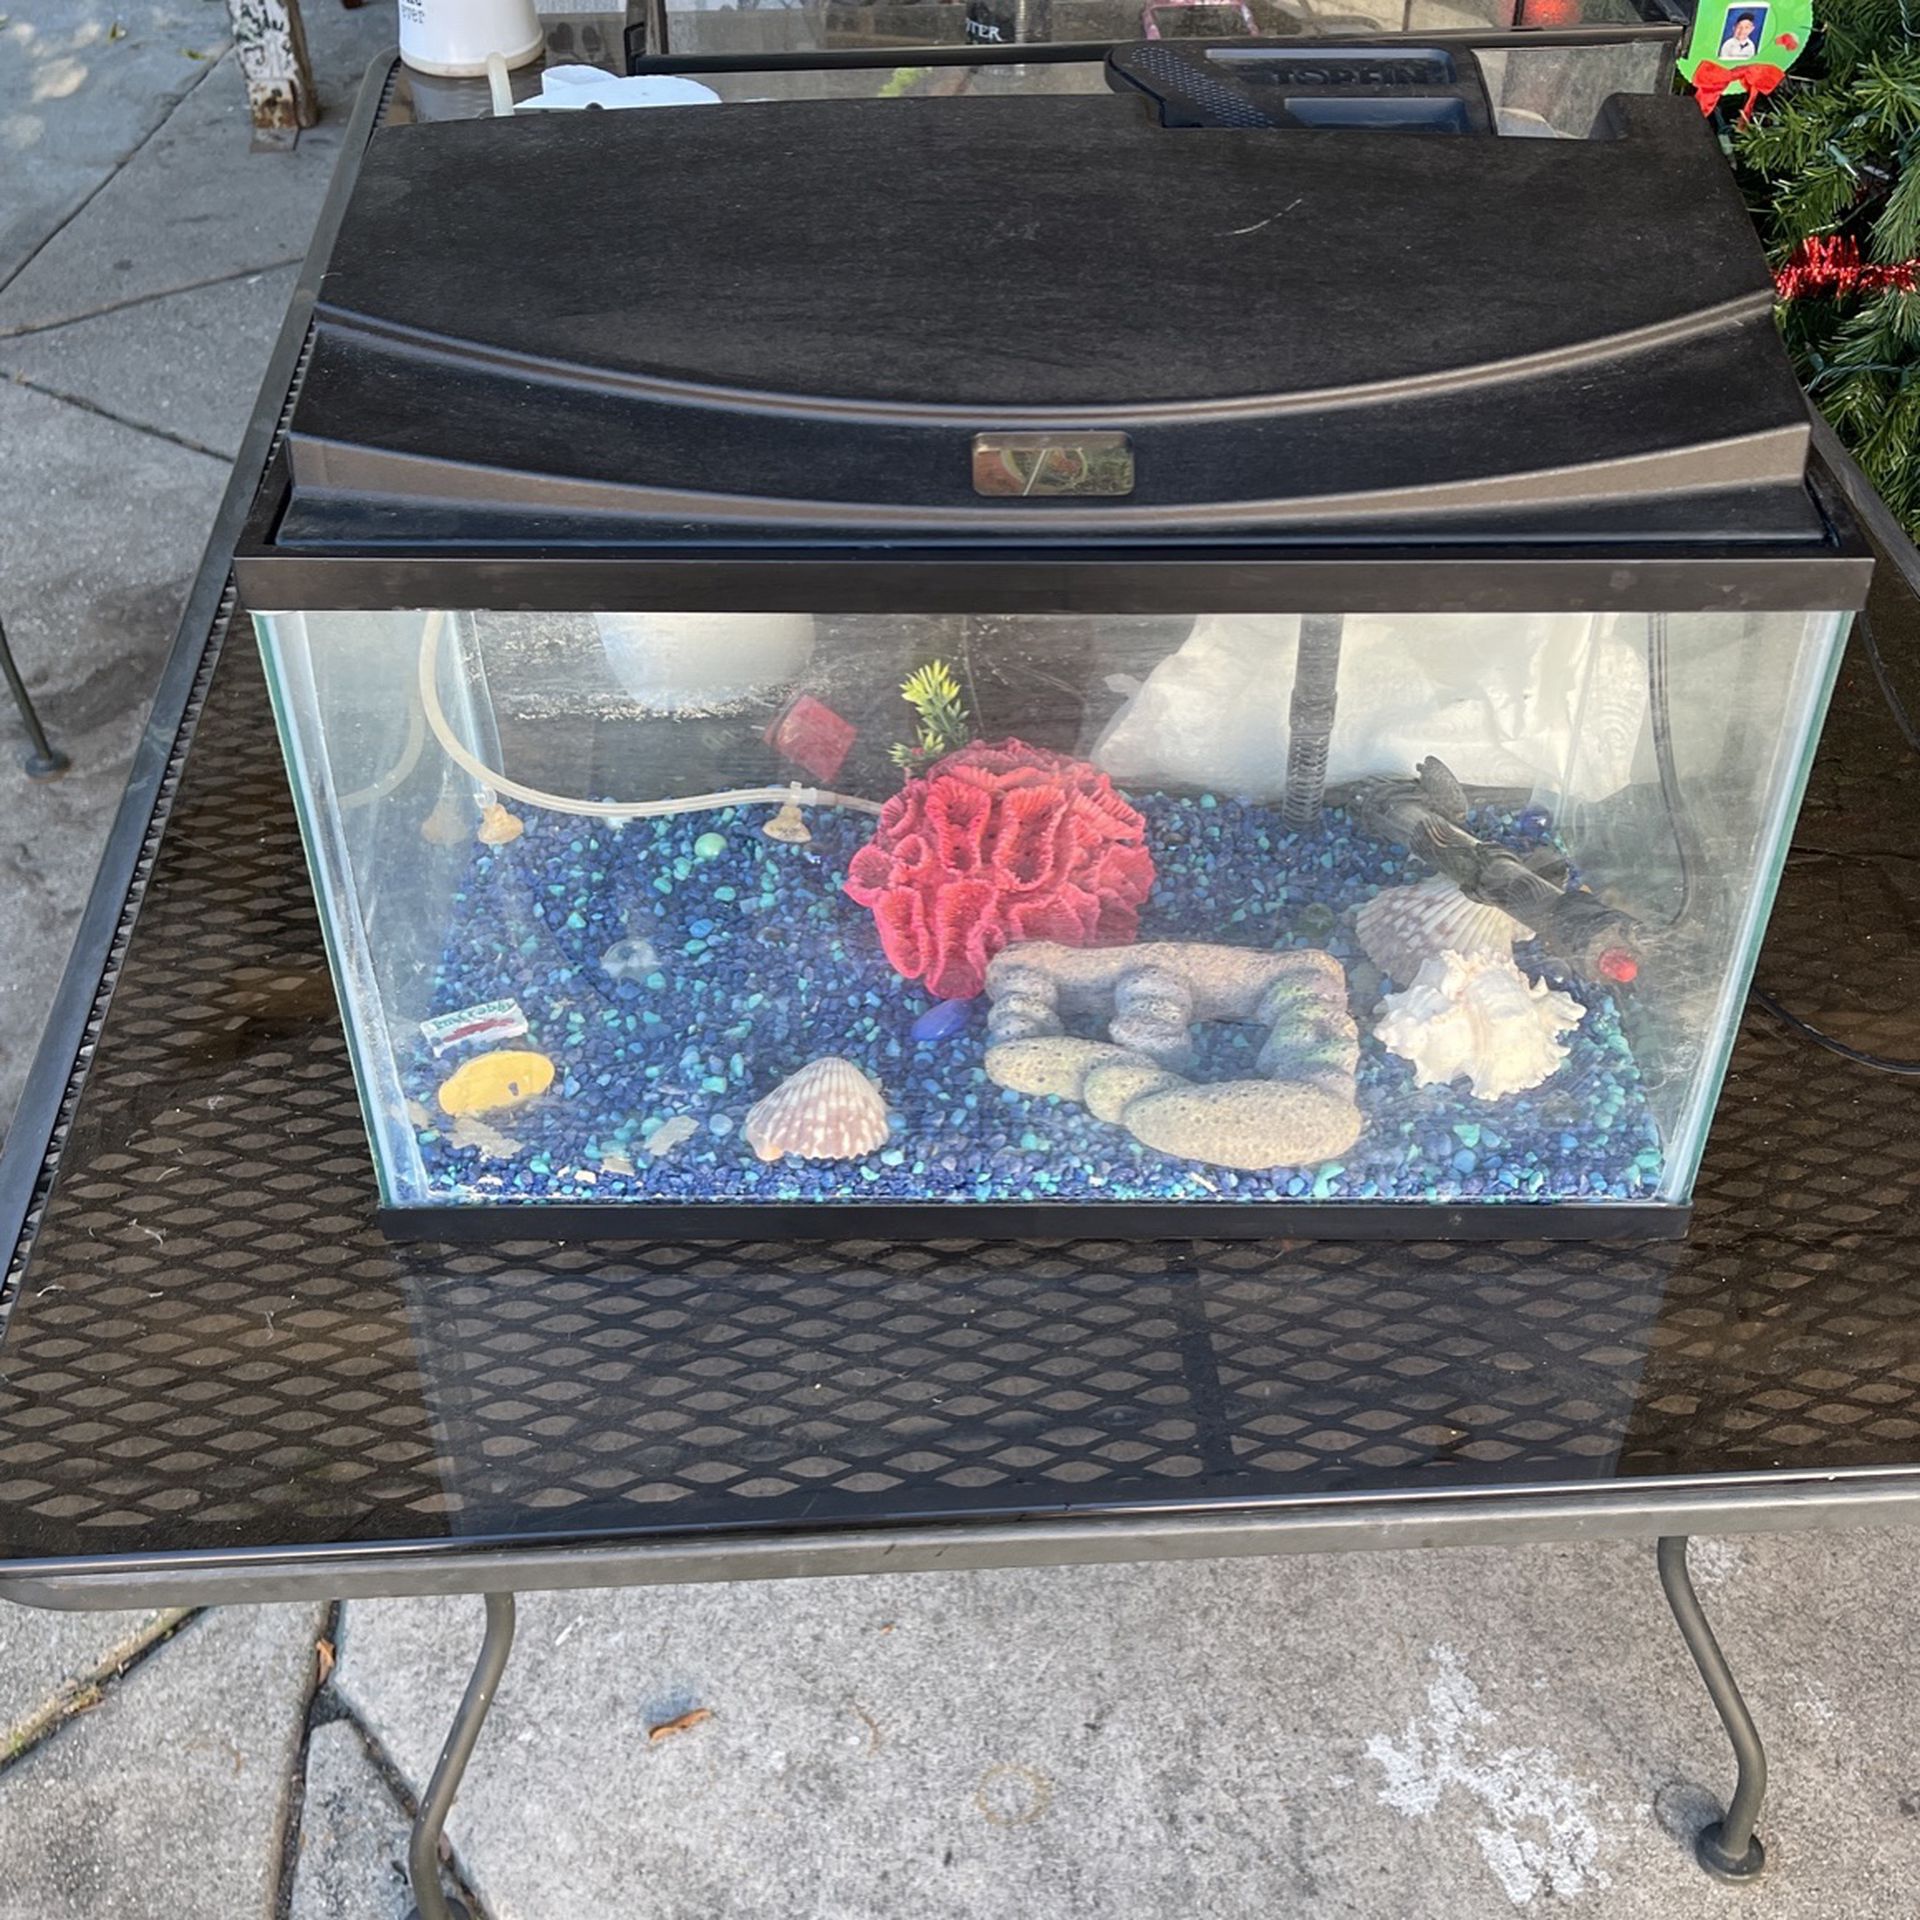 10 Gallon Fish Tank With Heater, Bubbler, Filter And Lights